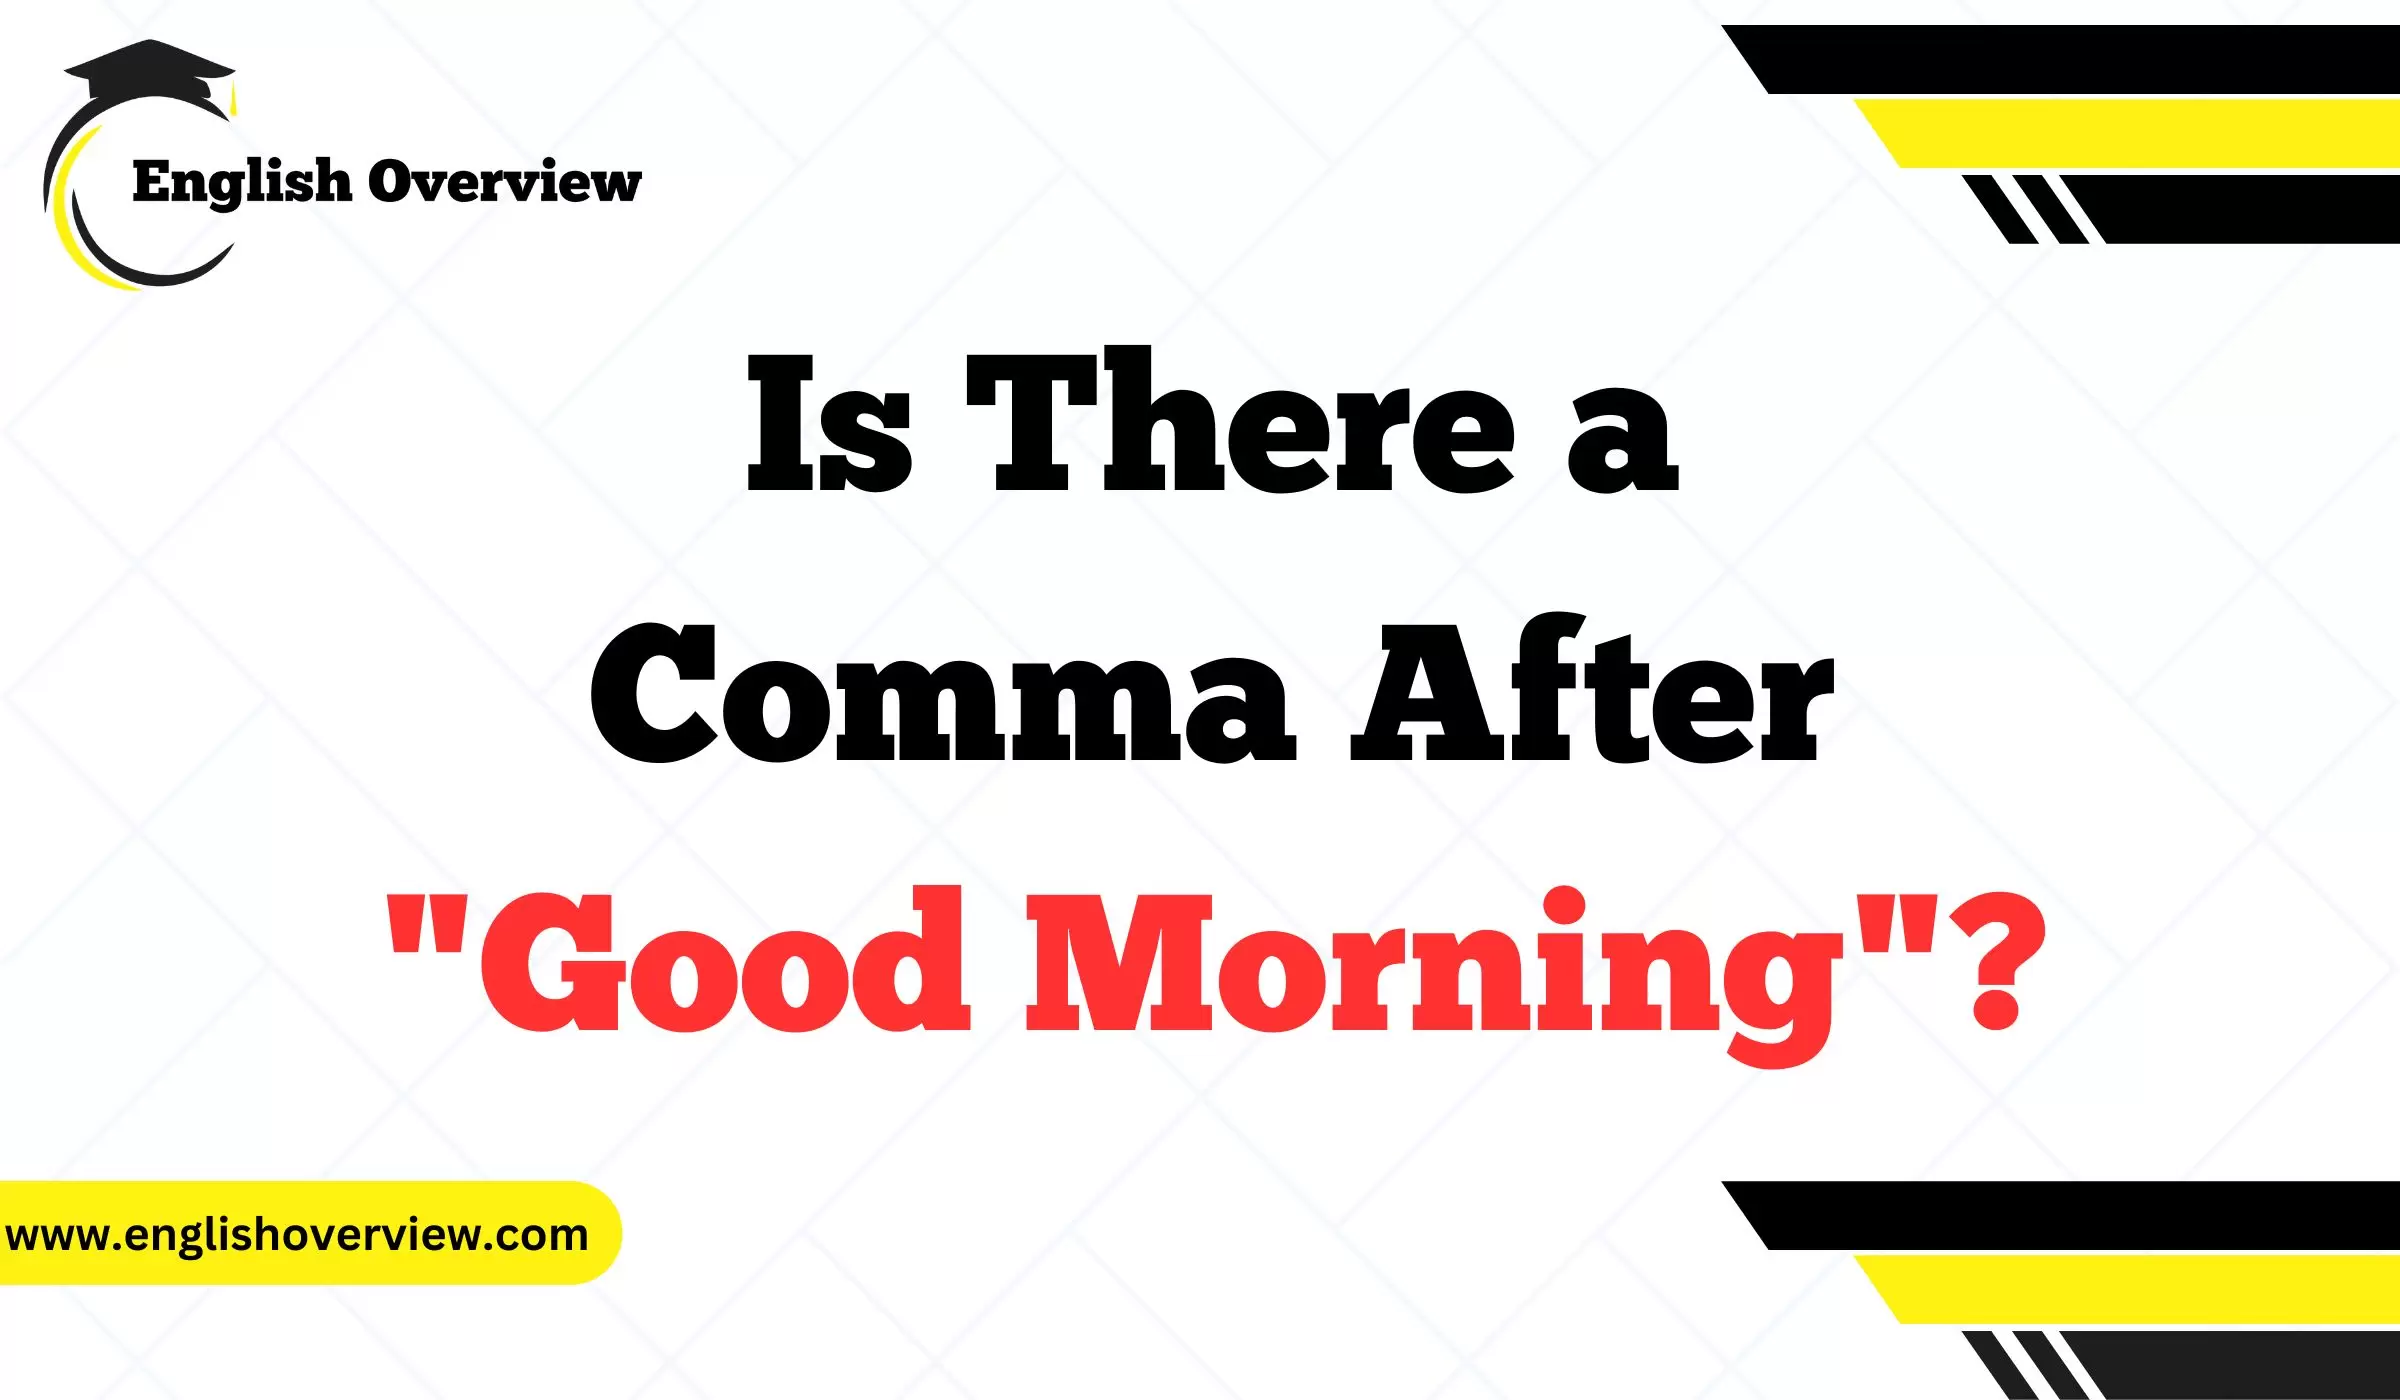 Is There a Comma After "Good Morning"